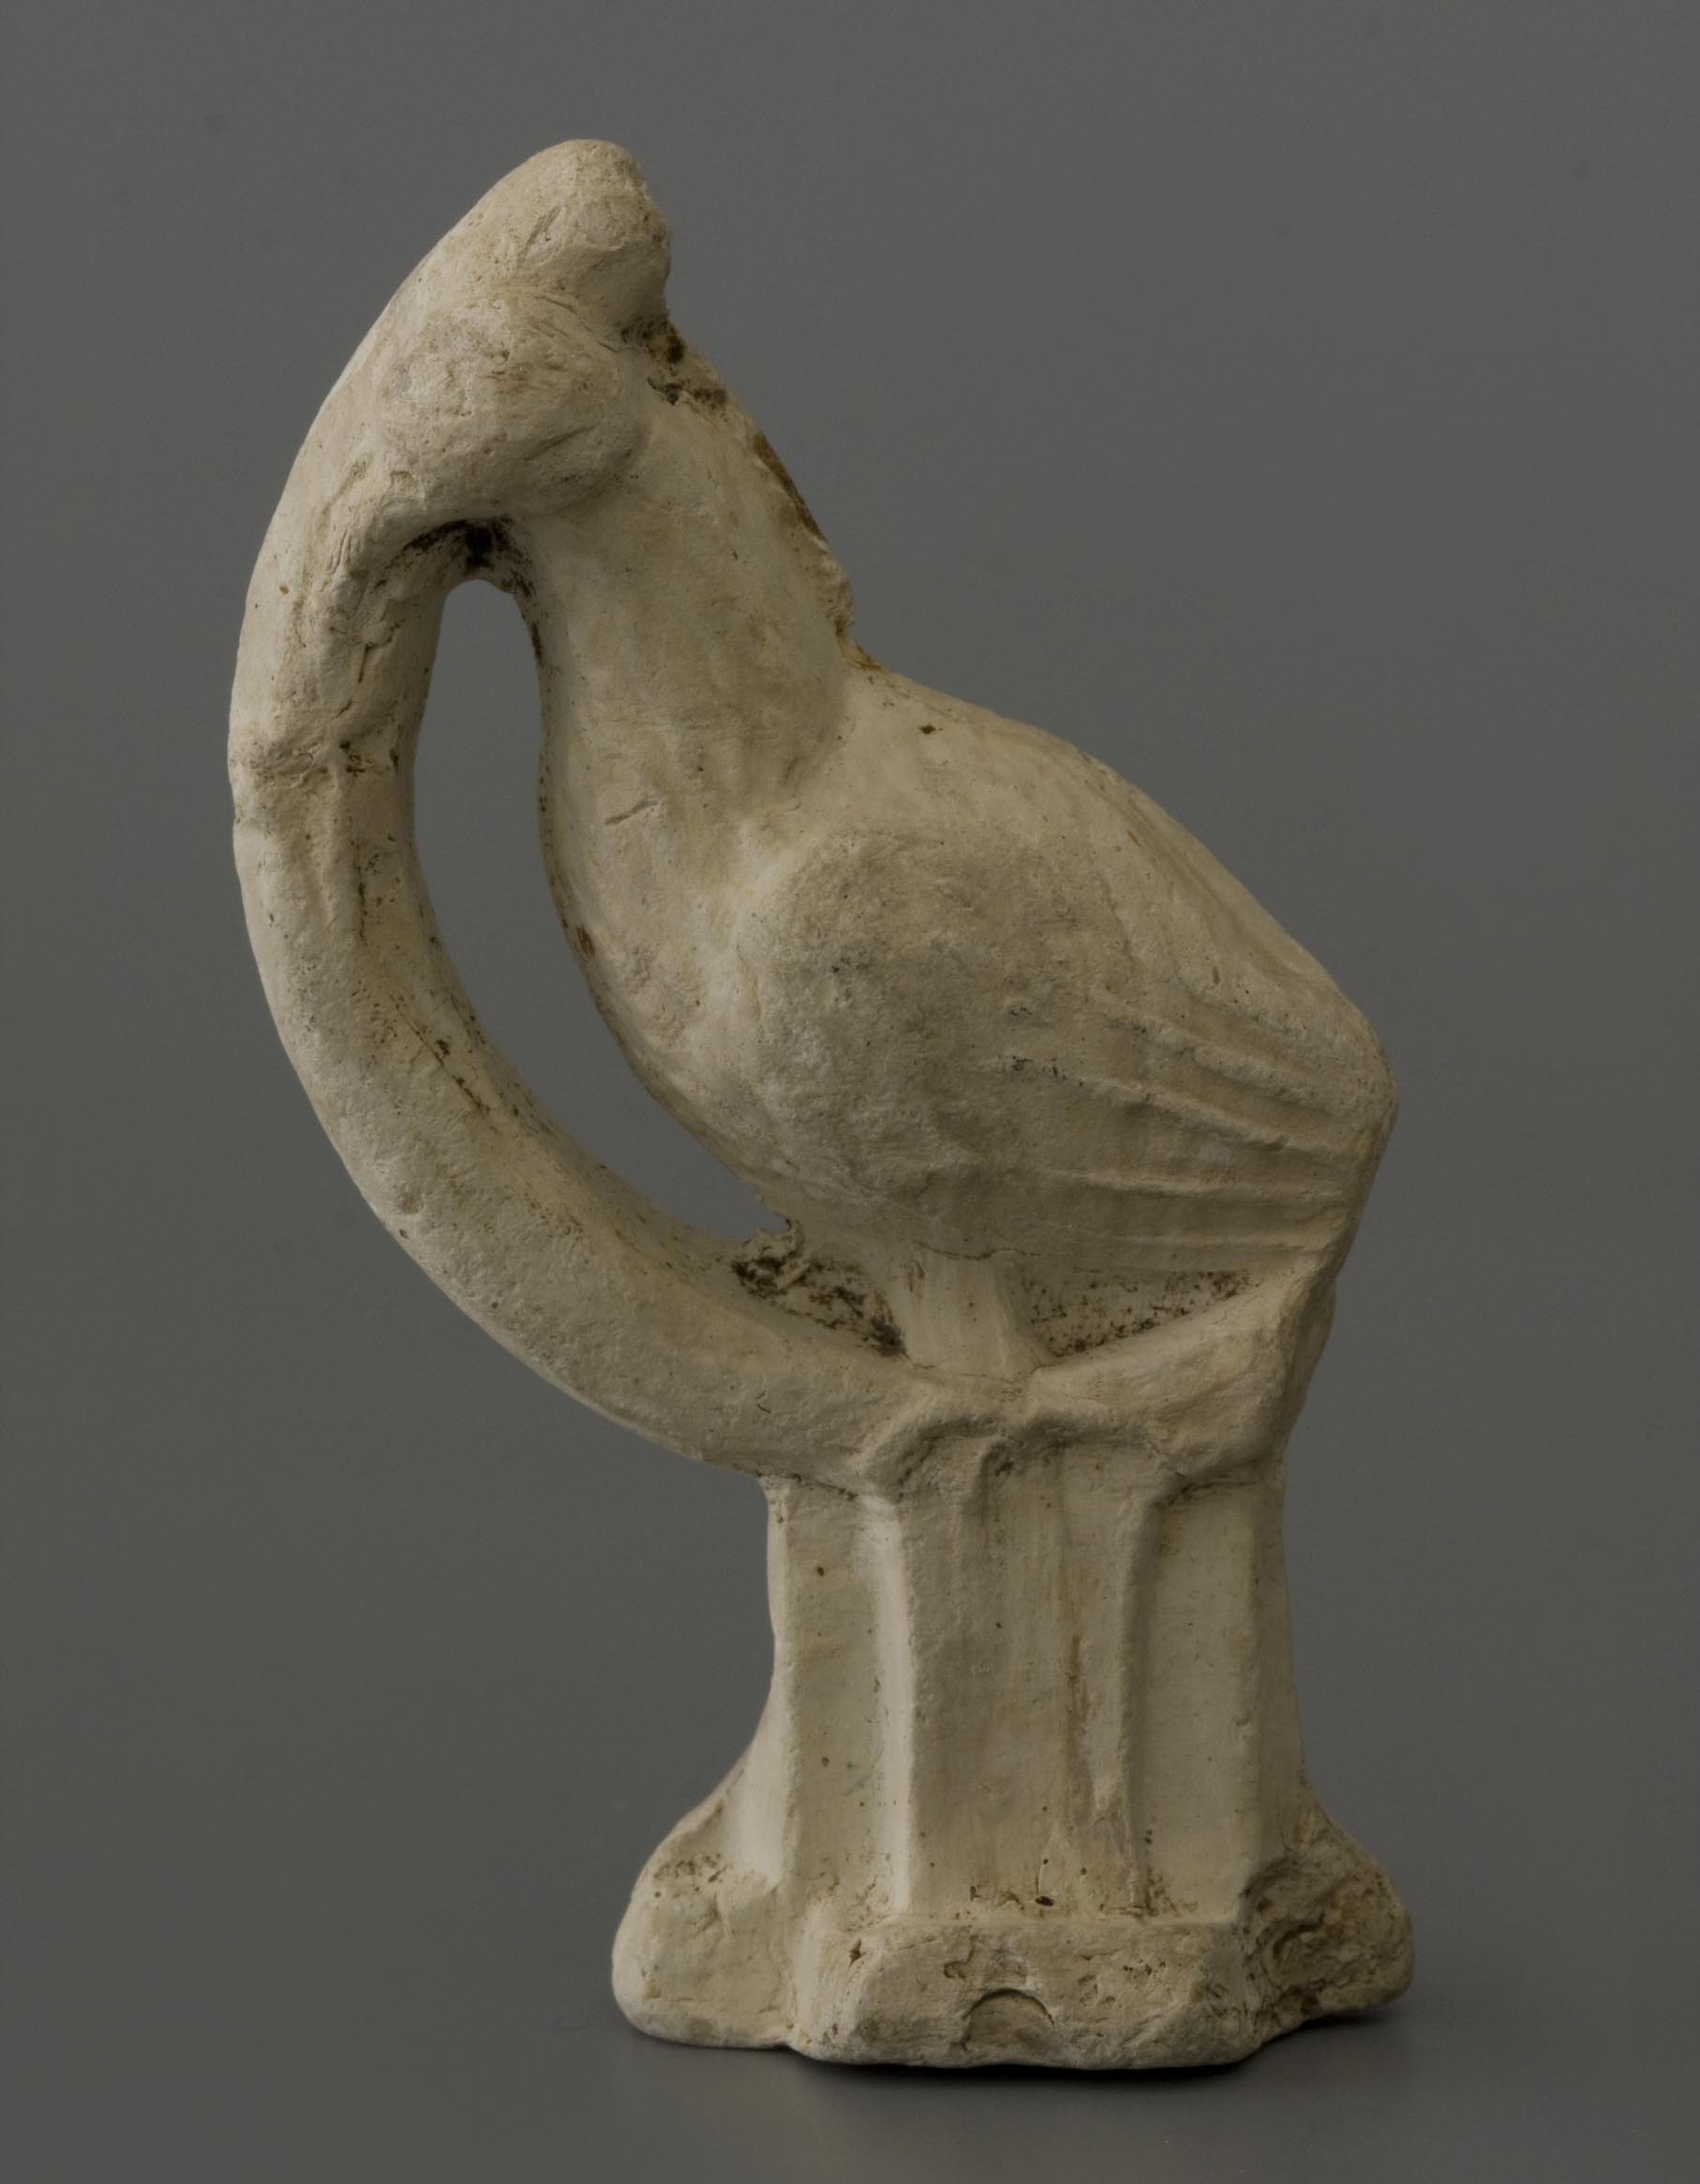 19-03.701-pipeclay-figurine-parrot-1